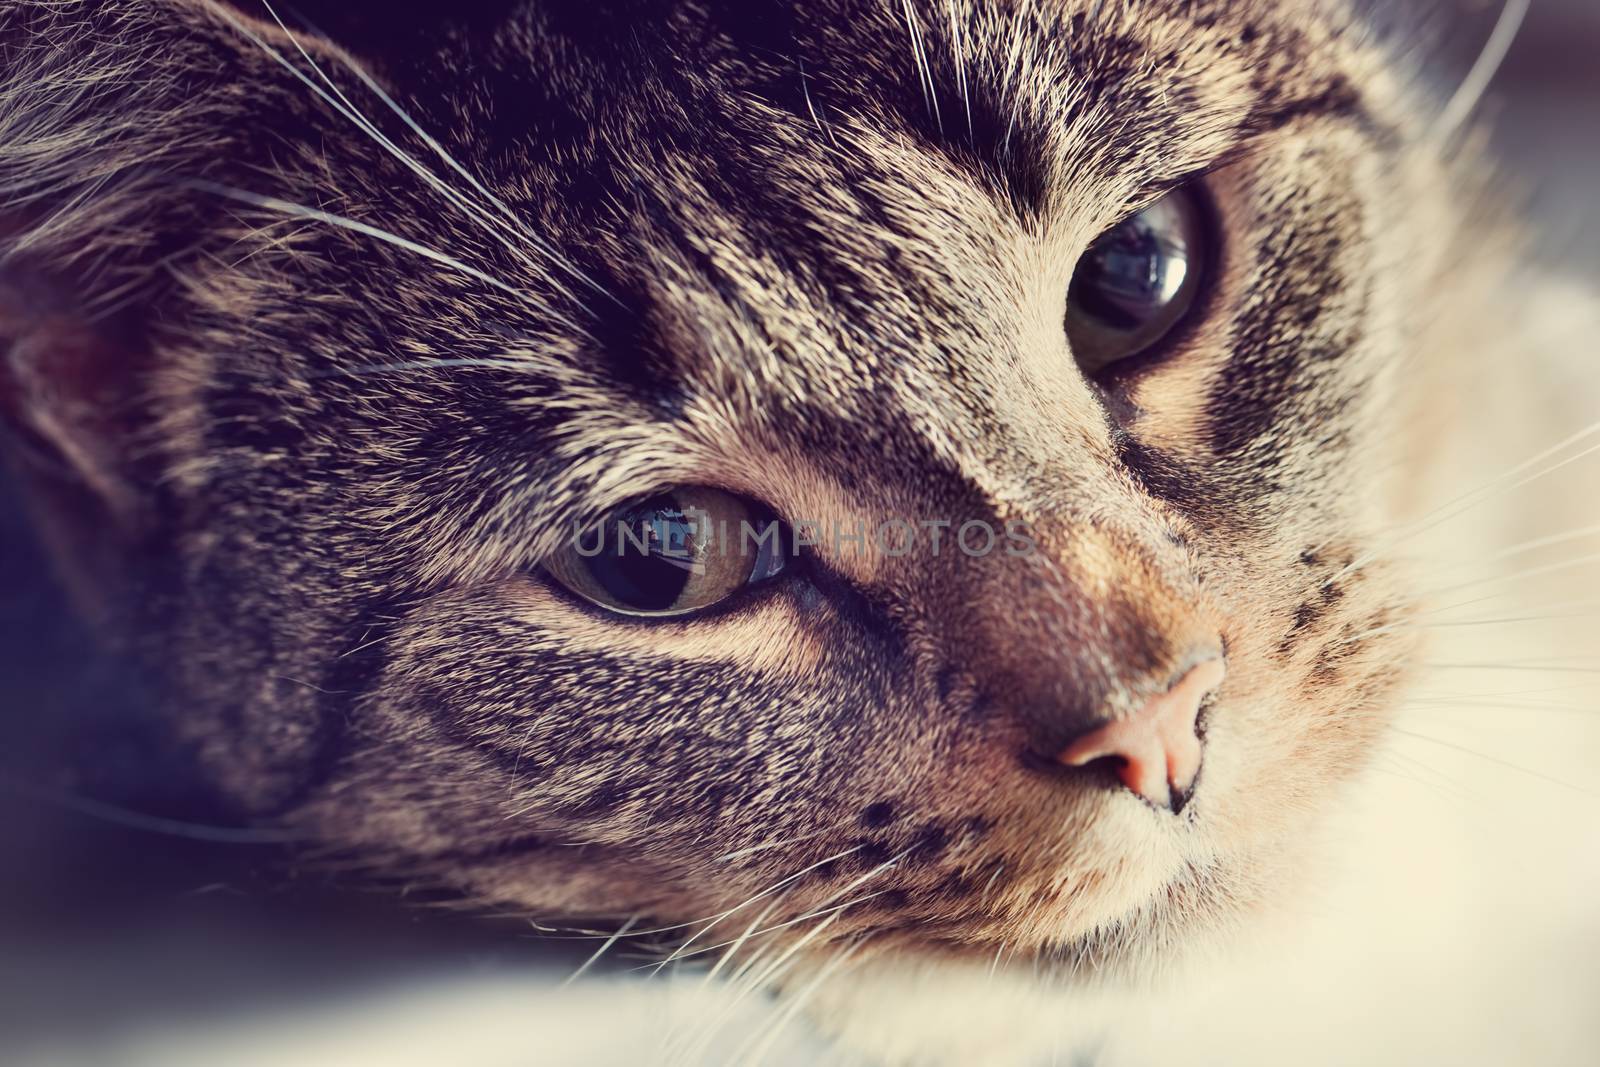 Cute cat lying in lazy, sleepy pose looking at the camera with its magnetic eyes. Close portrait, warm light